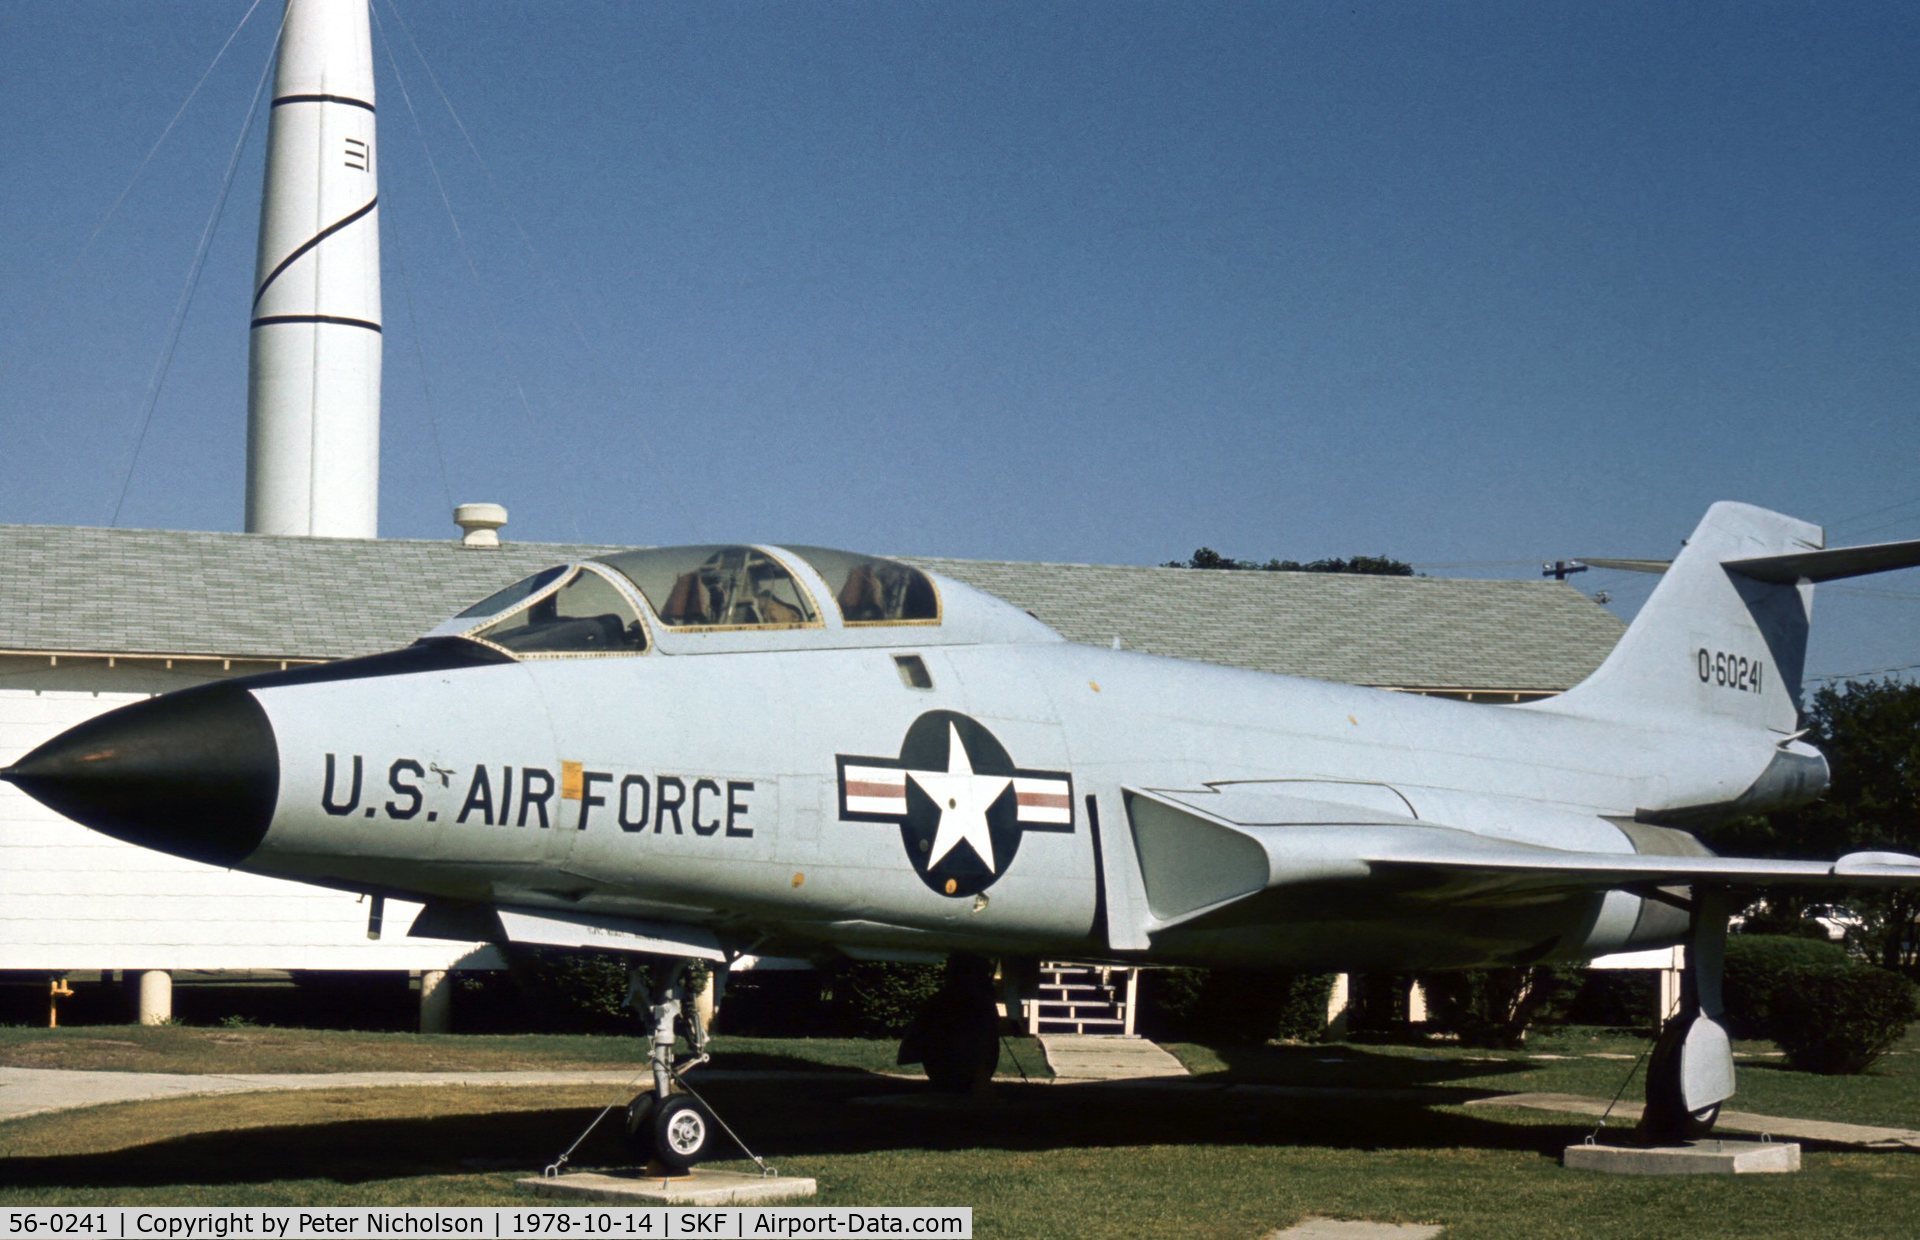 56-0241, 1957 McDonnell TF-101F Voodoo C/N 176, This TF-101 Voodoo was in the USAF History & Traditions Museum at Lackland AFB in 1978.